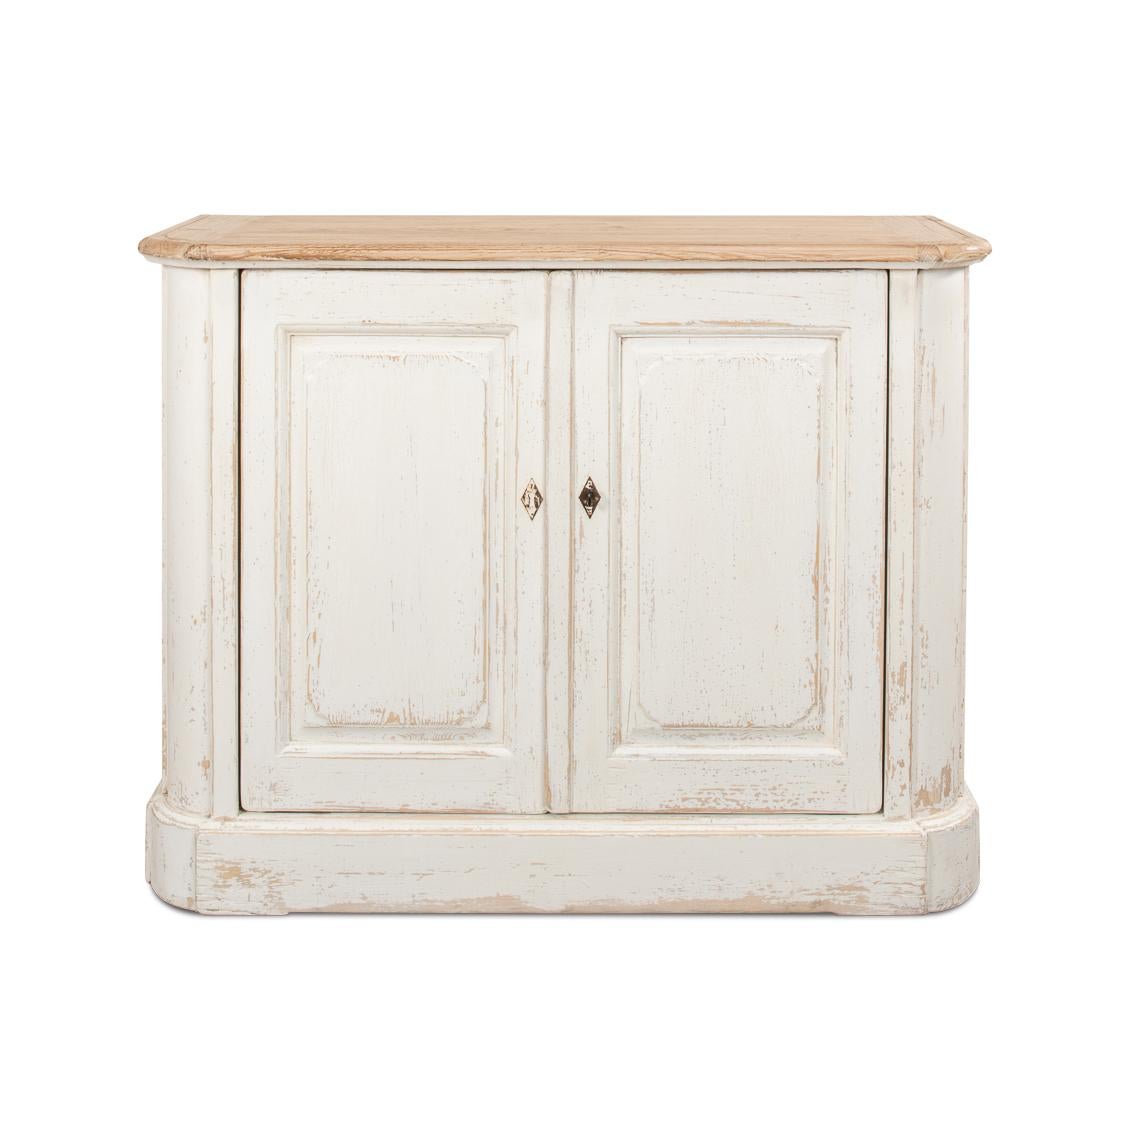 Reminiscent of a storied European past, this exquisite piece is crafted from reclaimed pine, it showcases a graceful antiqued whitewash-painted base and a natural finished wood top, lending it a serene country style with rustic elegance.

Perfectly